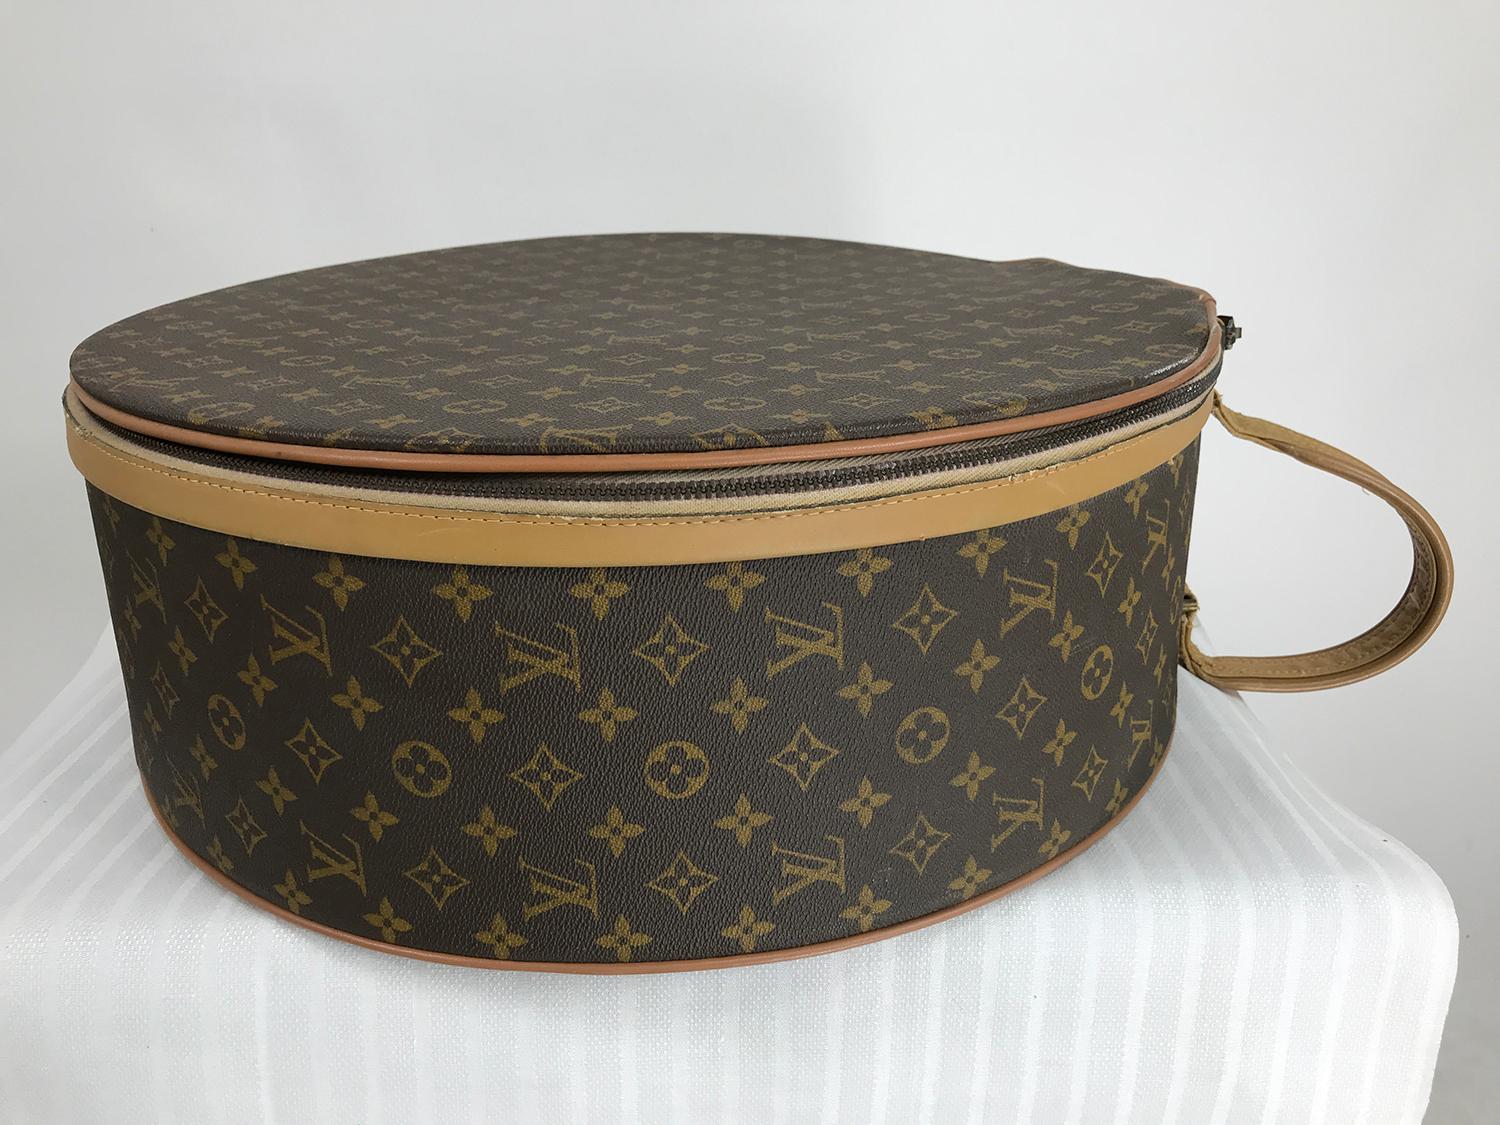 Louis Vuitton for The French Company, also labeled Saks Fifth Ave. 50cm Boite Chapeaux, round hat box. In remarkably good condition for it's age and use. Louis Vuitton logo canvas with leather welt cord and trimming outlining the zipper. Oval